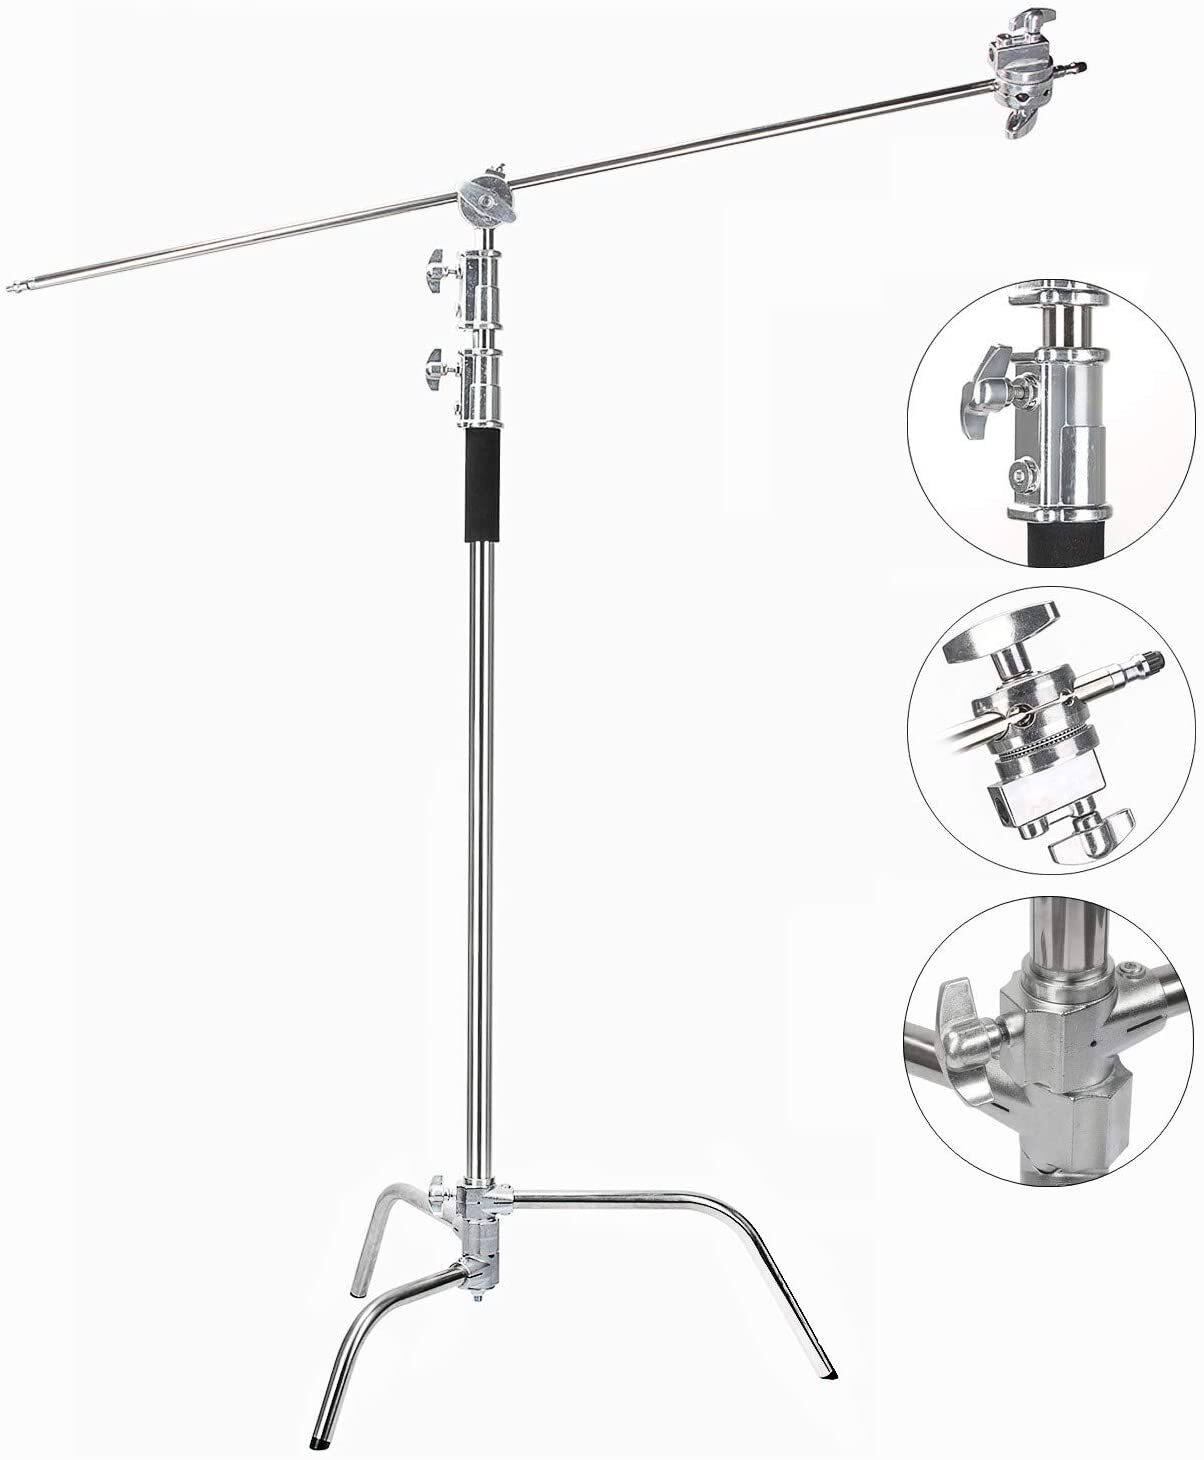 ANDYCINE C Stand Heavy Duty 100% Metal Max 10.8ft/330cm with 4.2ft